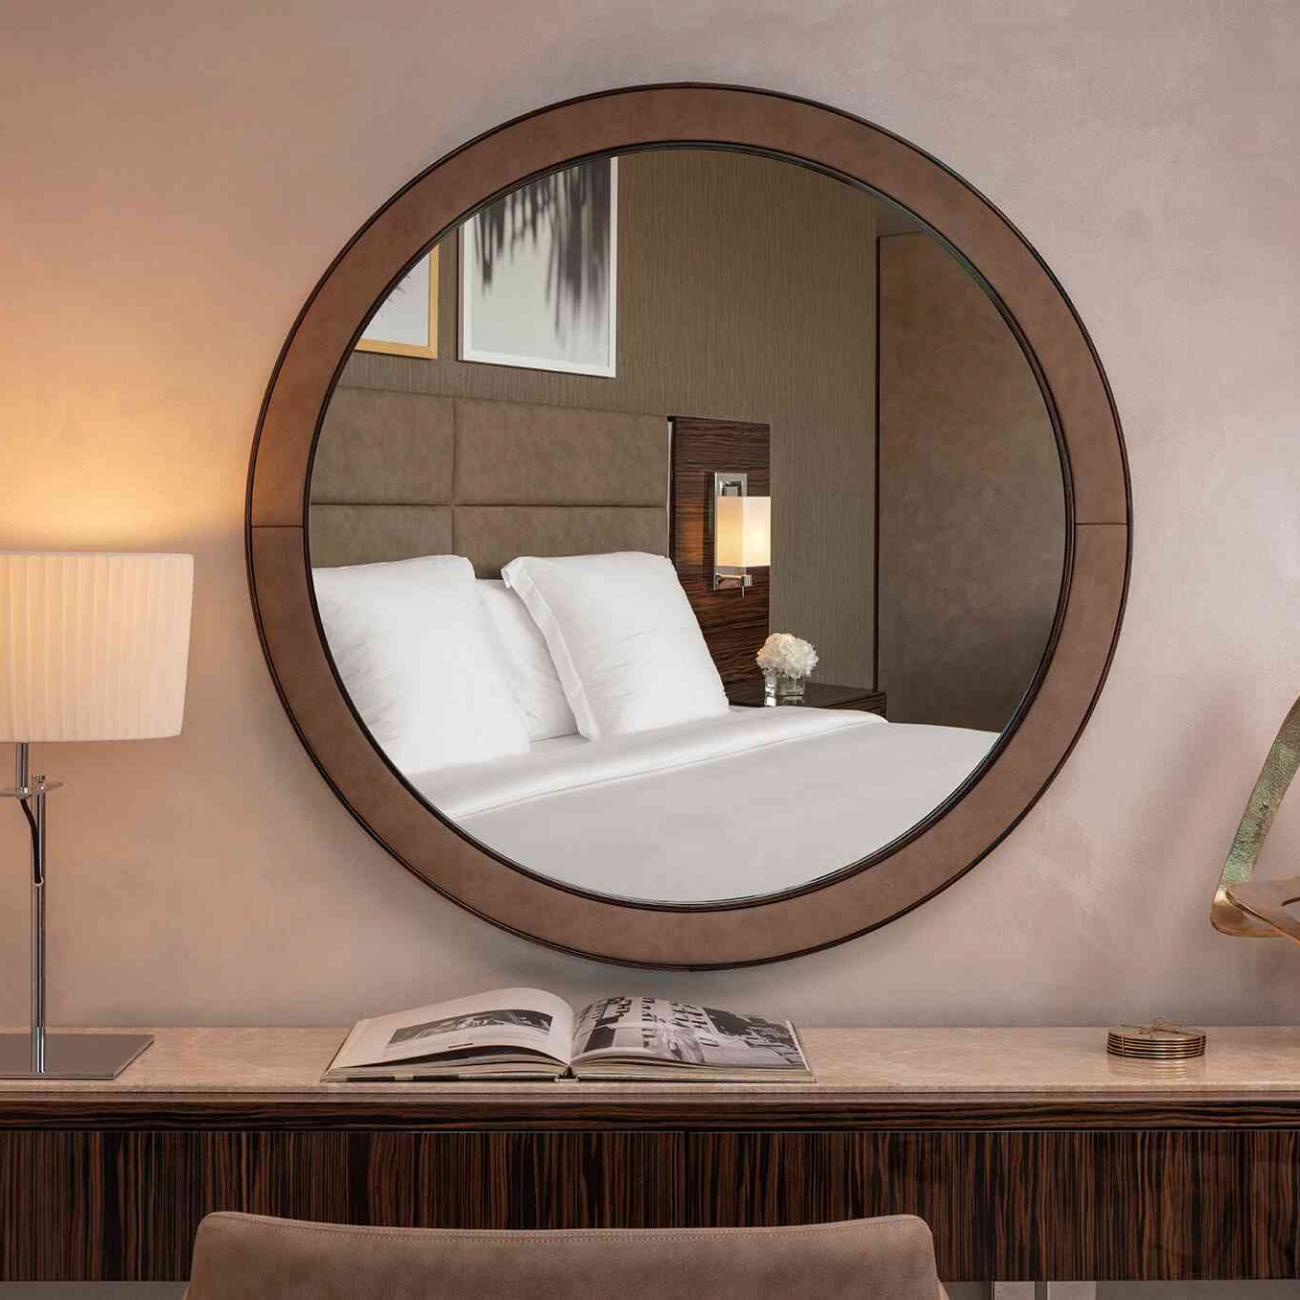 A vanity table with a lap, and round wall mirror that reflects a double bed